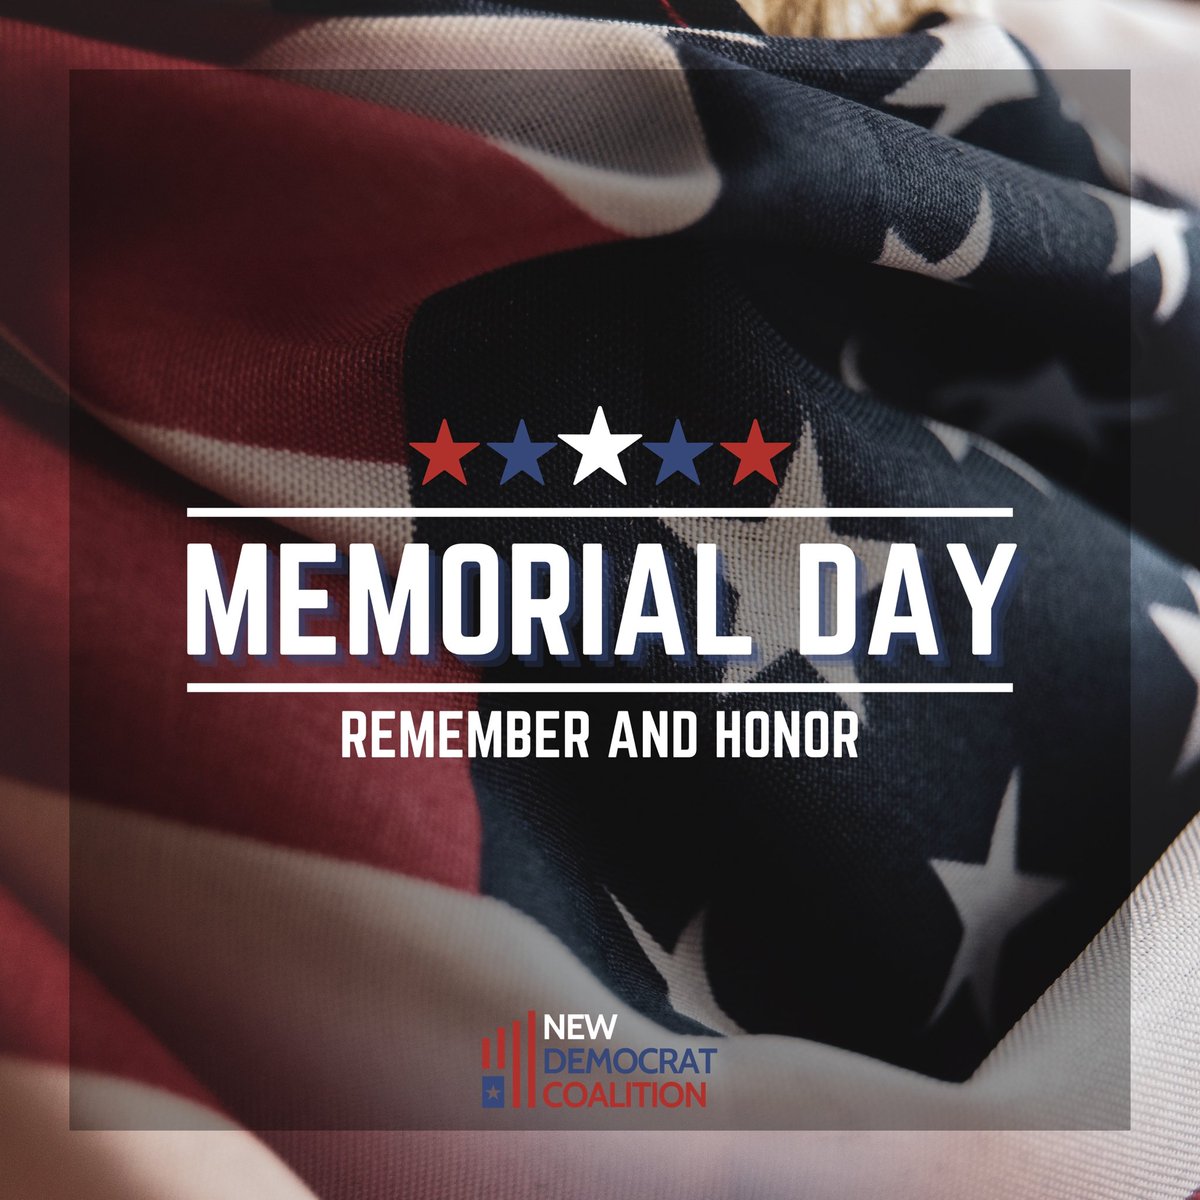 Today on #MemorialDay, we remember and honor the brave servicemembers who made the ultimate sacrifice. These courageous men and women laid down their lives to protect our democracy. We are forever grateful for their service.